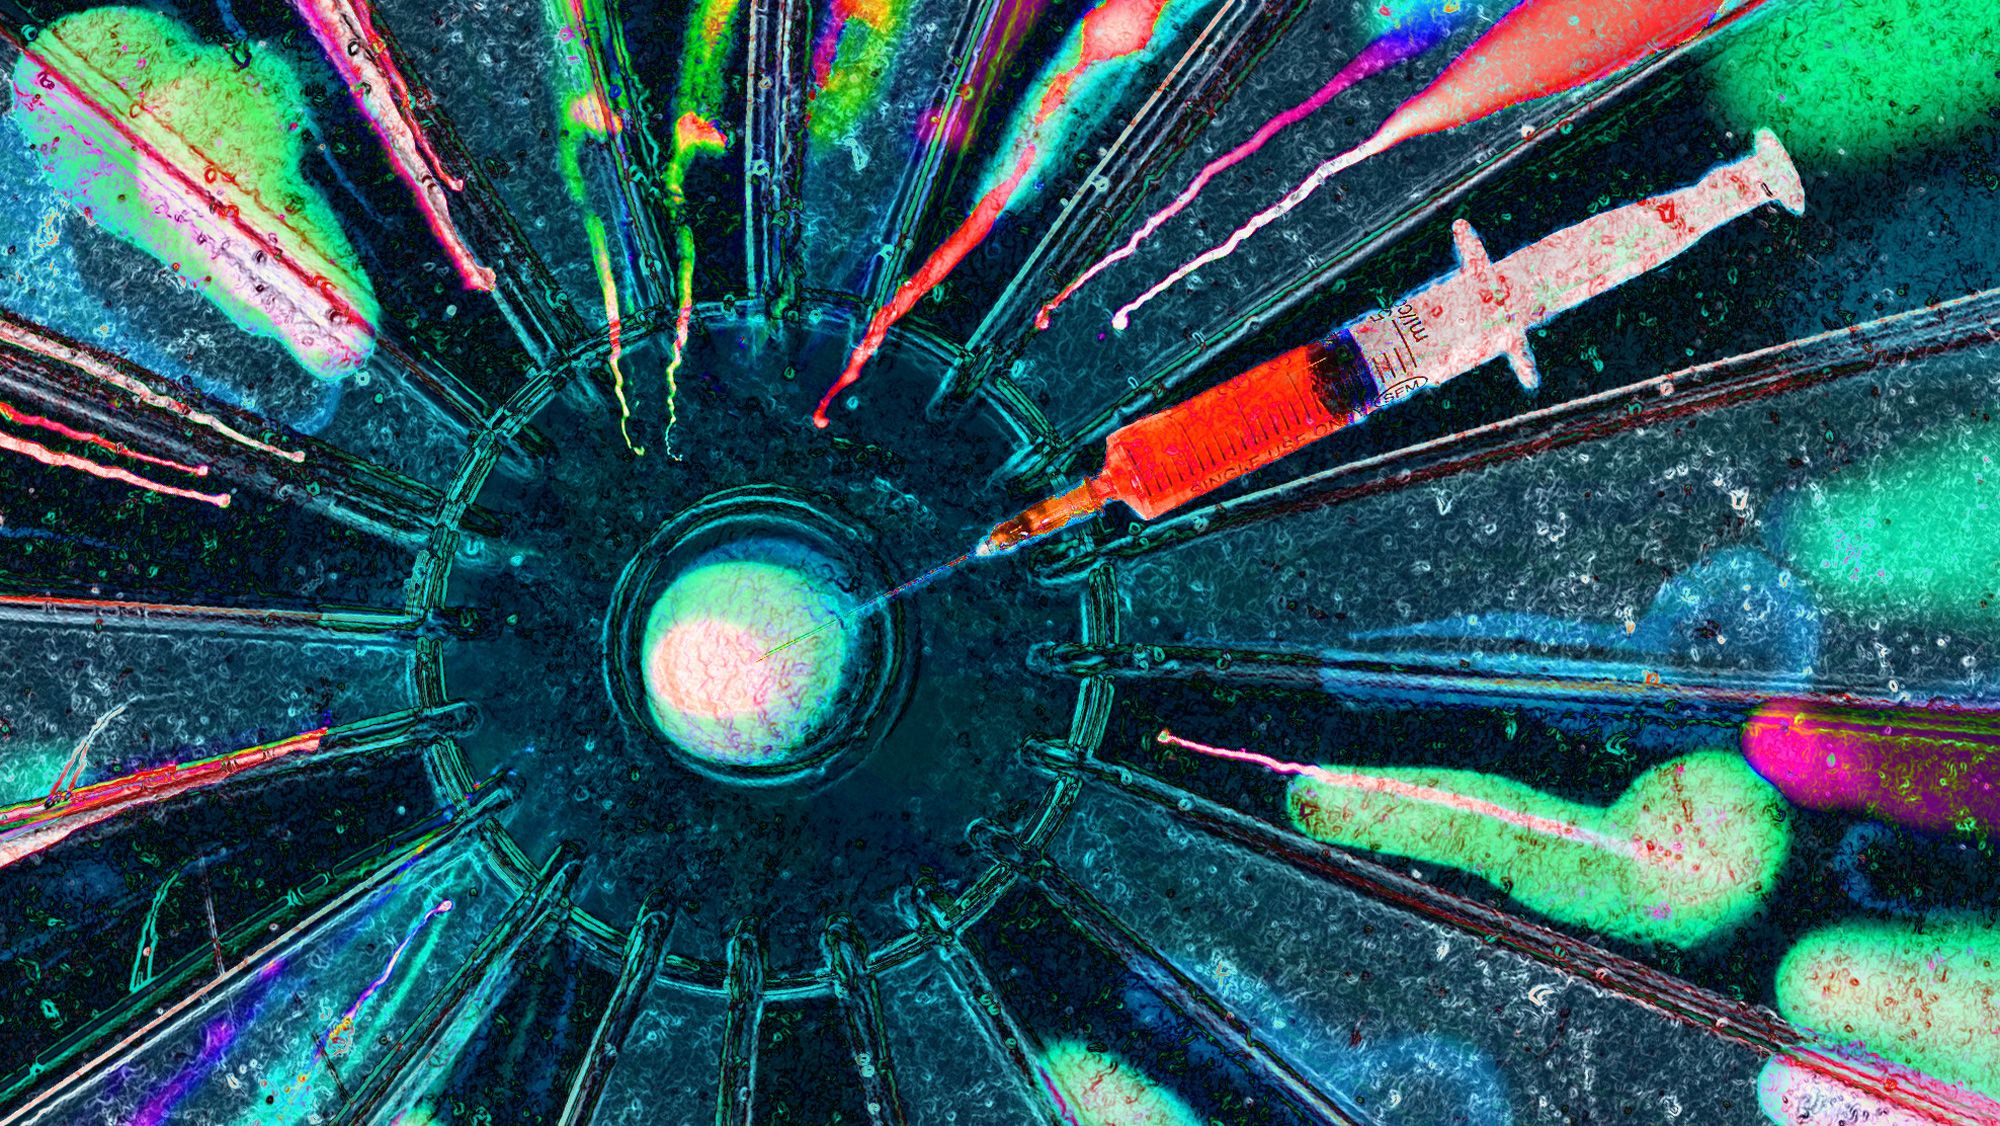 Stylized dark teal and black dartboard with a reddish orange vaccine syringe dart hitting the bullseye with abstract colors radiating around the center of the closely cropped board.